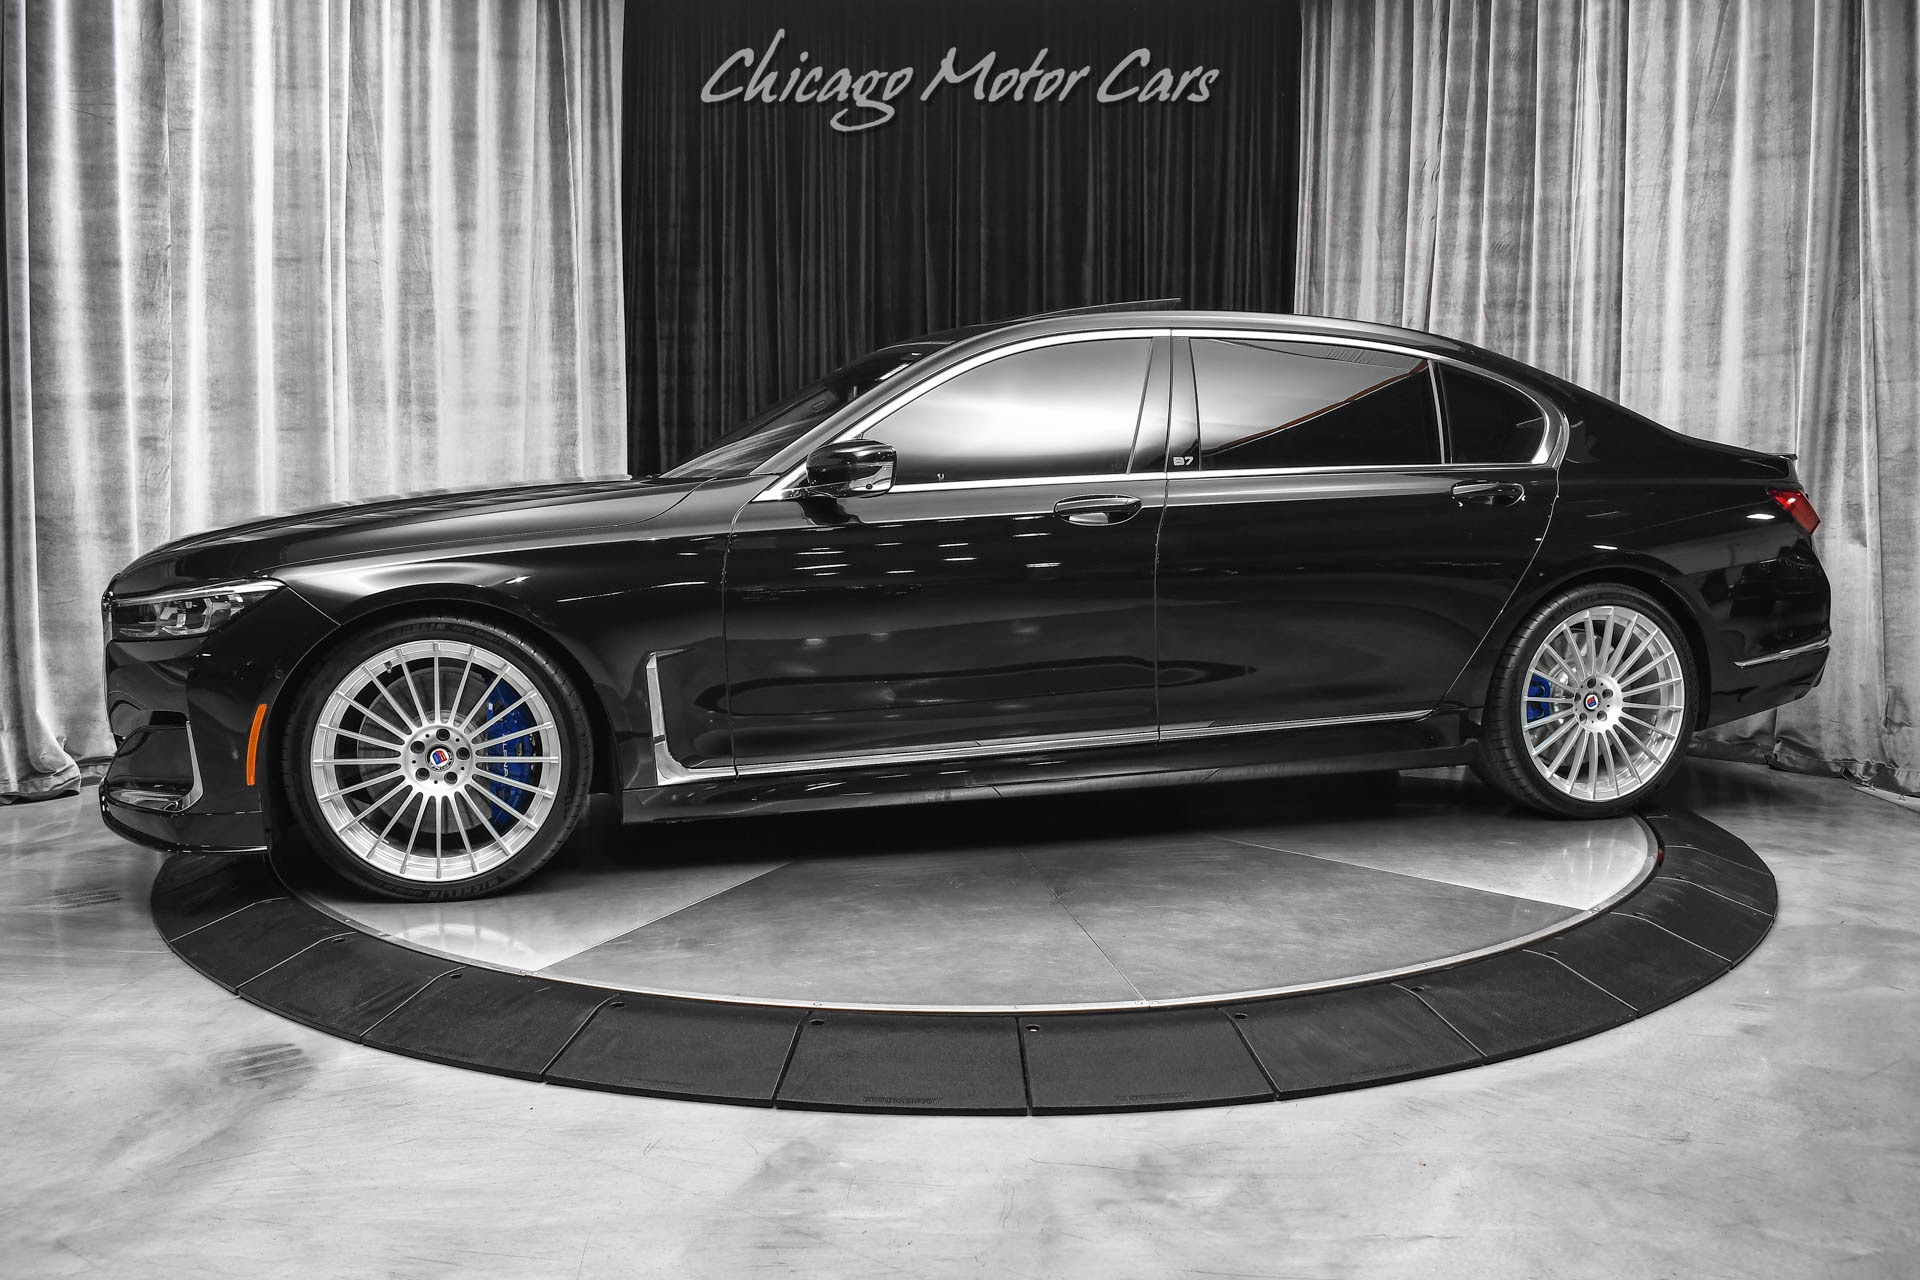 Used 2022 BMW Alpina B7 xDrive LWB-Bowers & Wilkins-Drive Assist! Full  Front PPF! Ceramic Coated! For Sale (Special Pricing) | Chicago Motor Cars  Stock #18152B